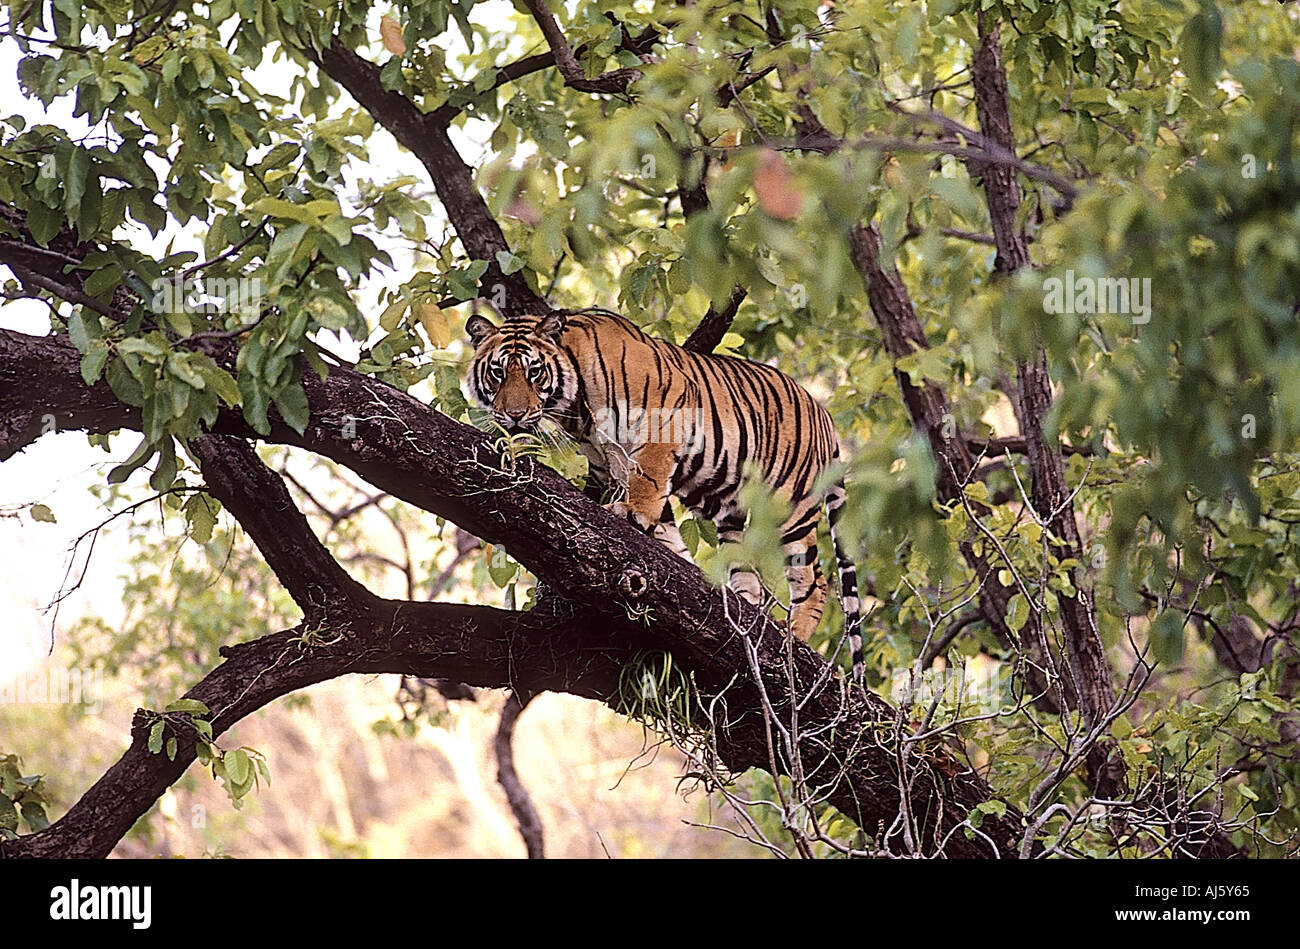 Indian Tiger standing on a tree branch in Kanha National Park wildlife sanctuary in Madhya Pradesh Central India Asia Stock Photo